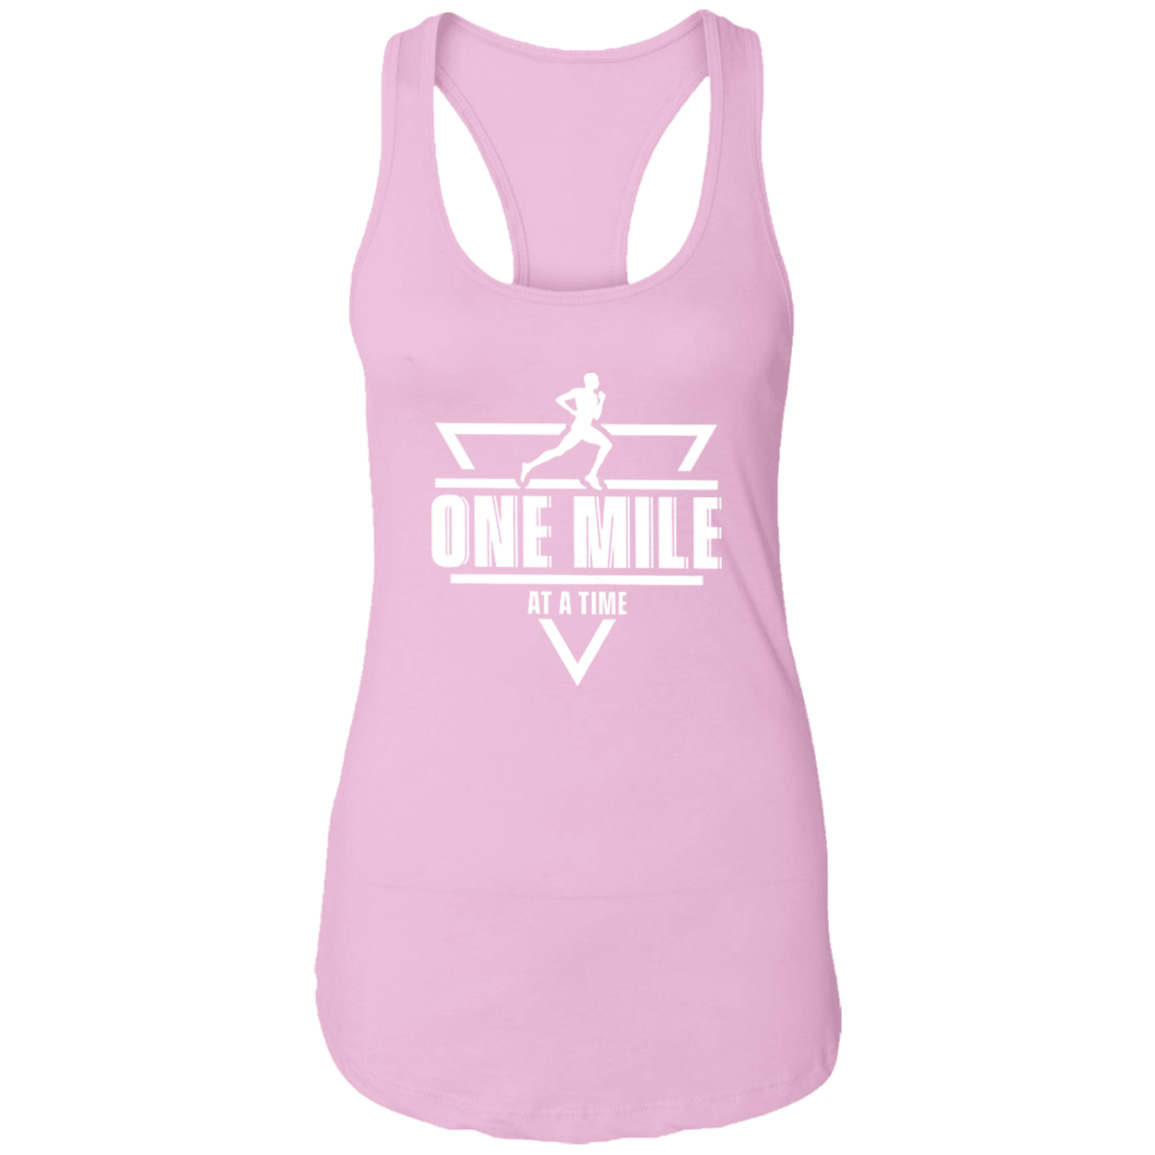 one mile at a time (shirt of the month)